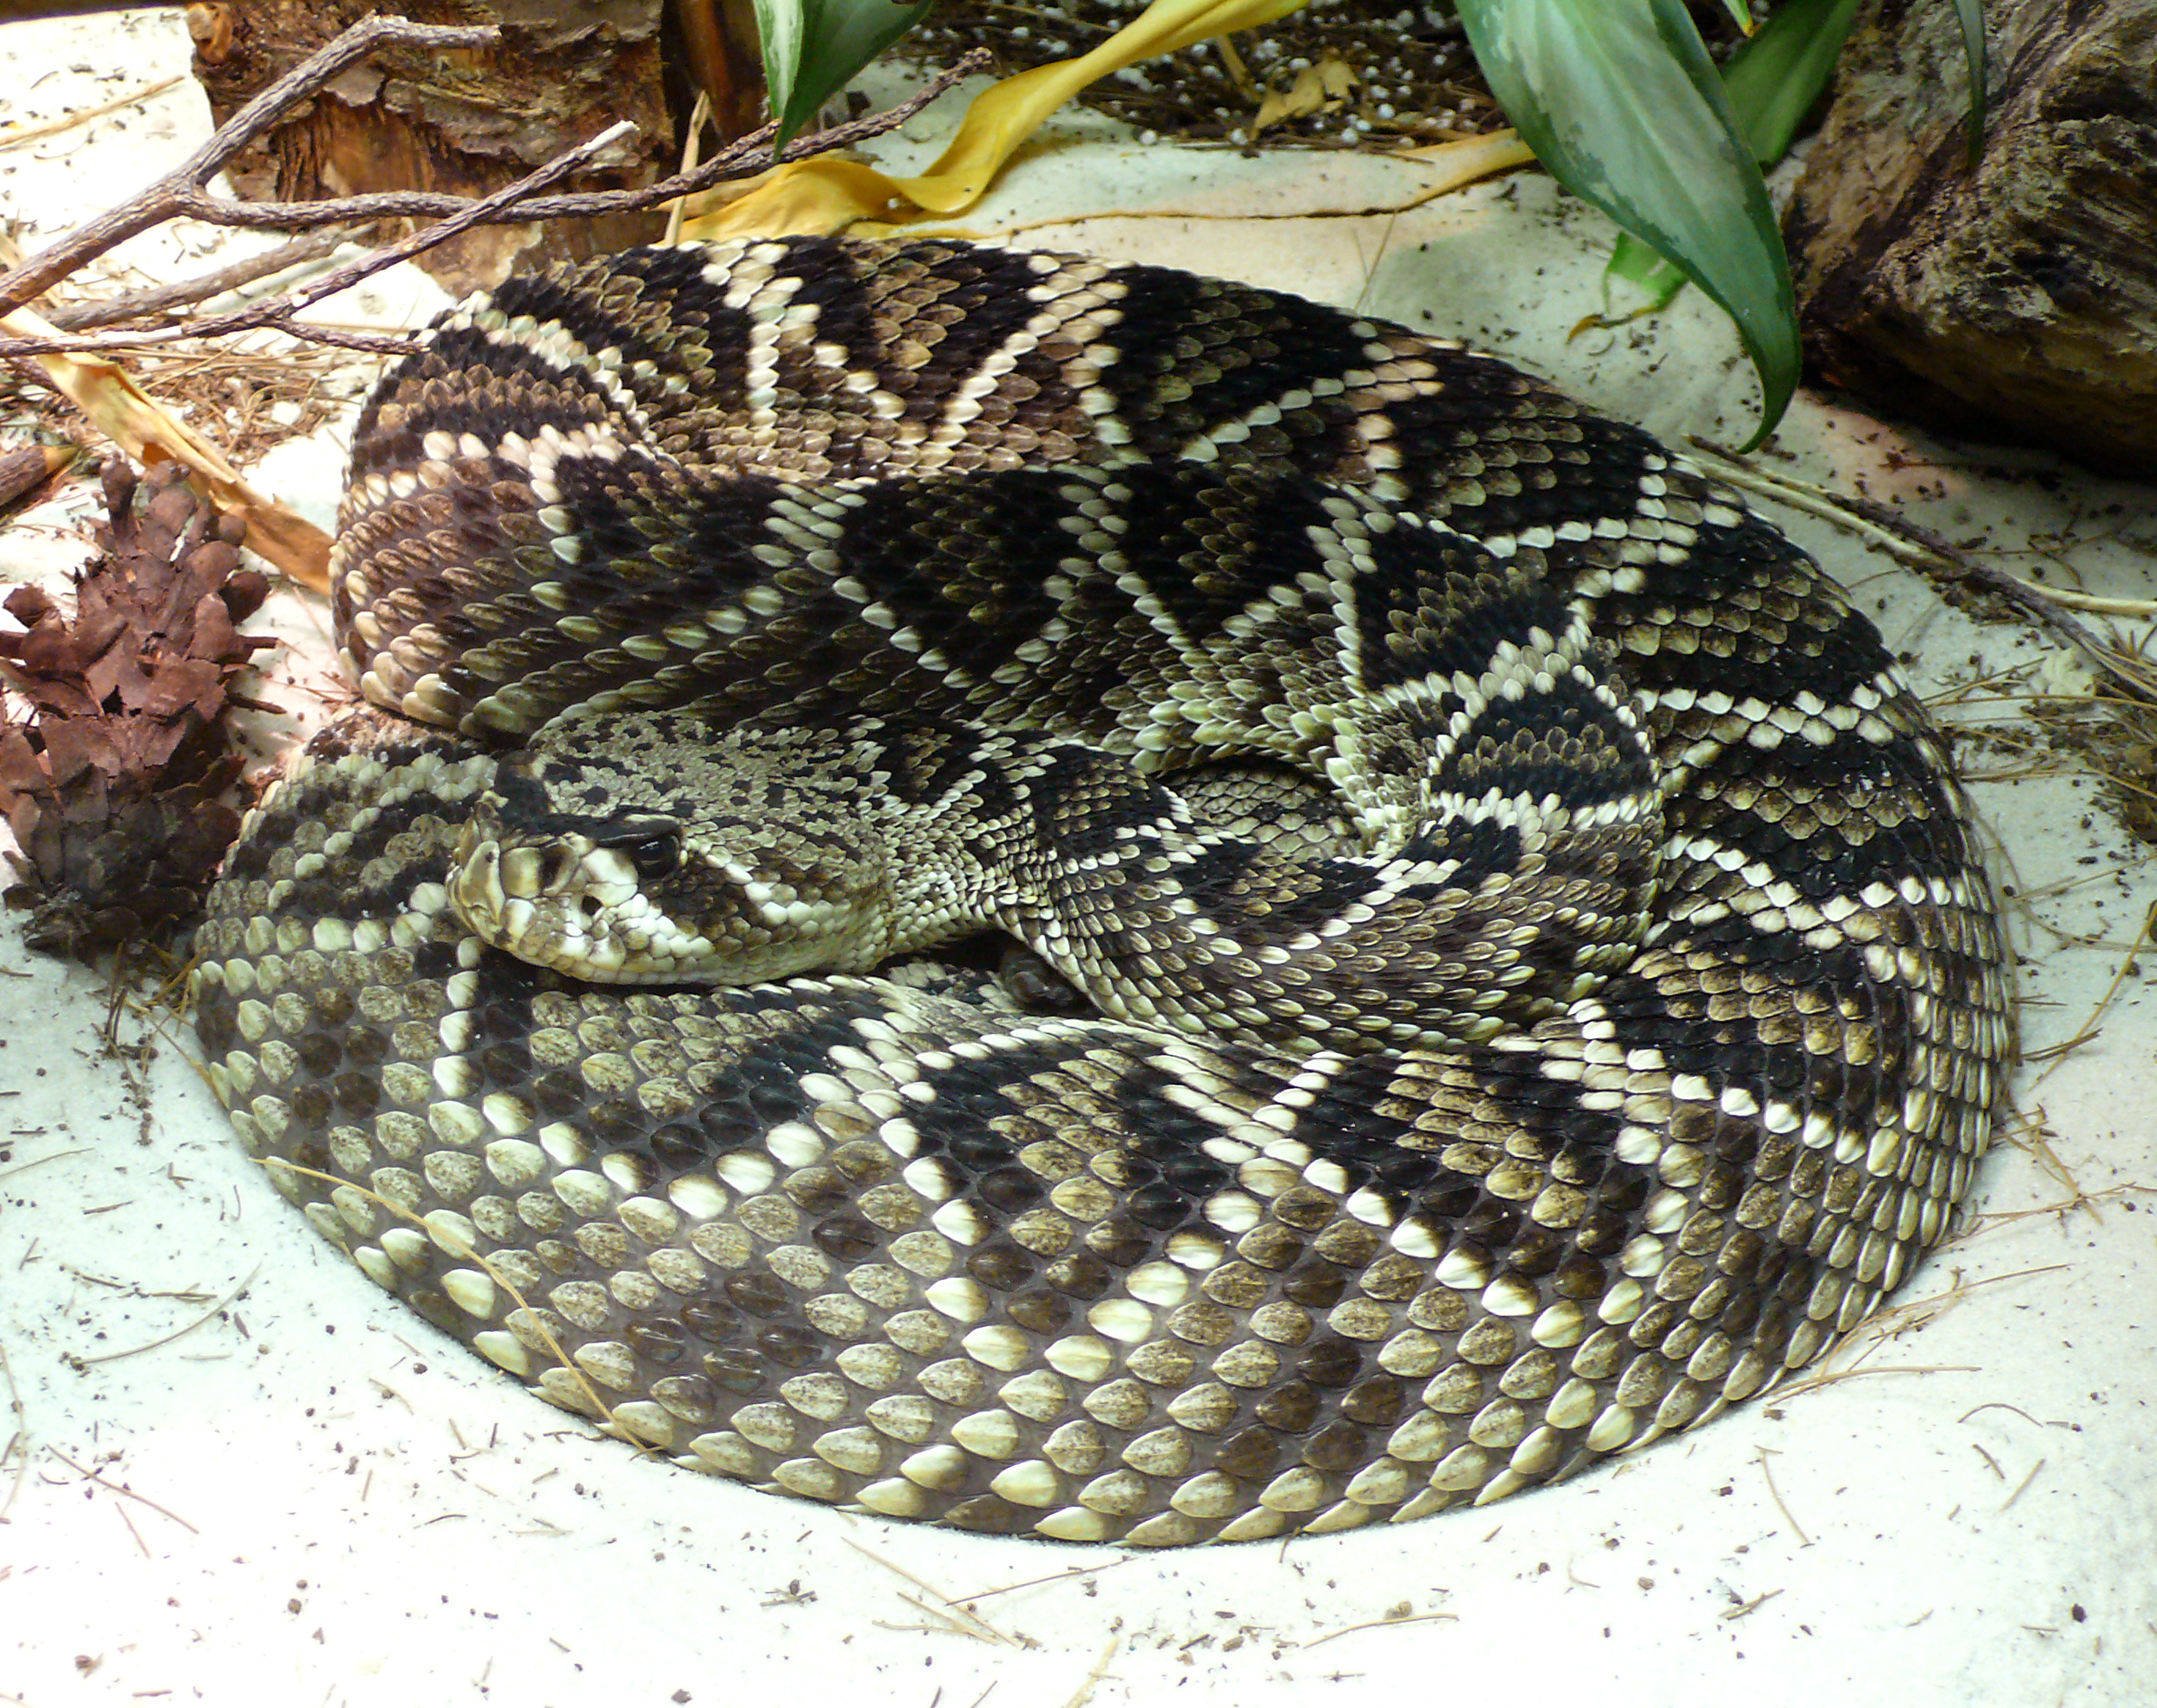 What is the largest rattlesnake ever recorded?